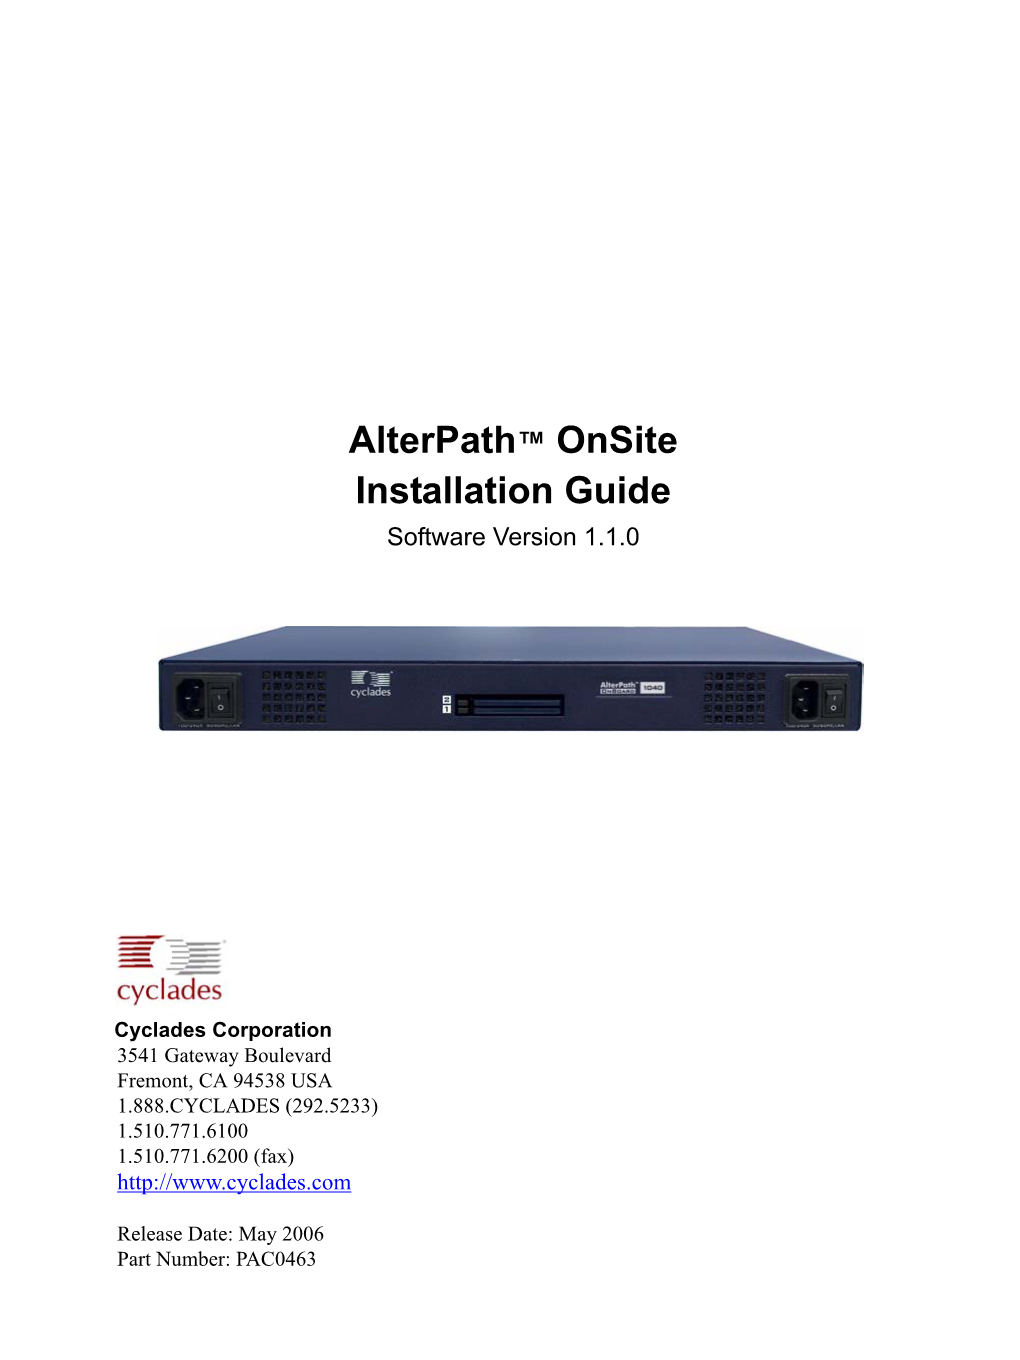 Alterpath™ Onsite Installation Guide Software Version 1.1.0